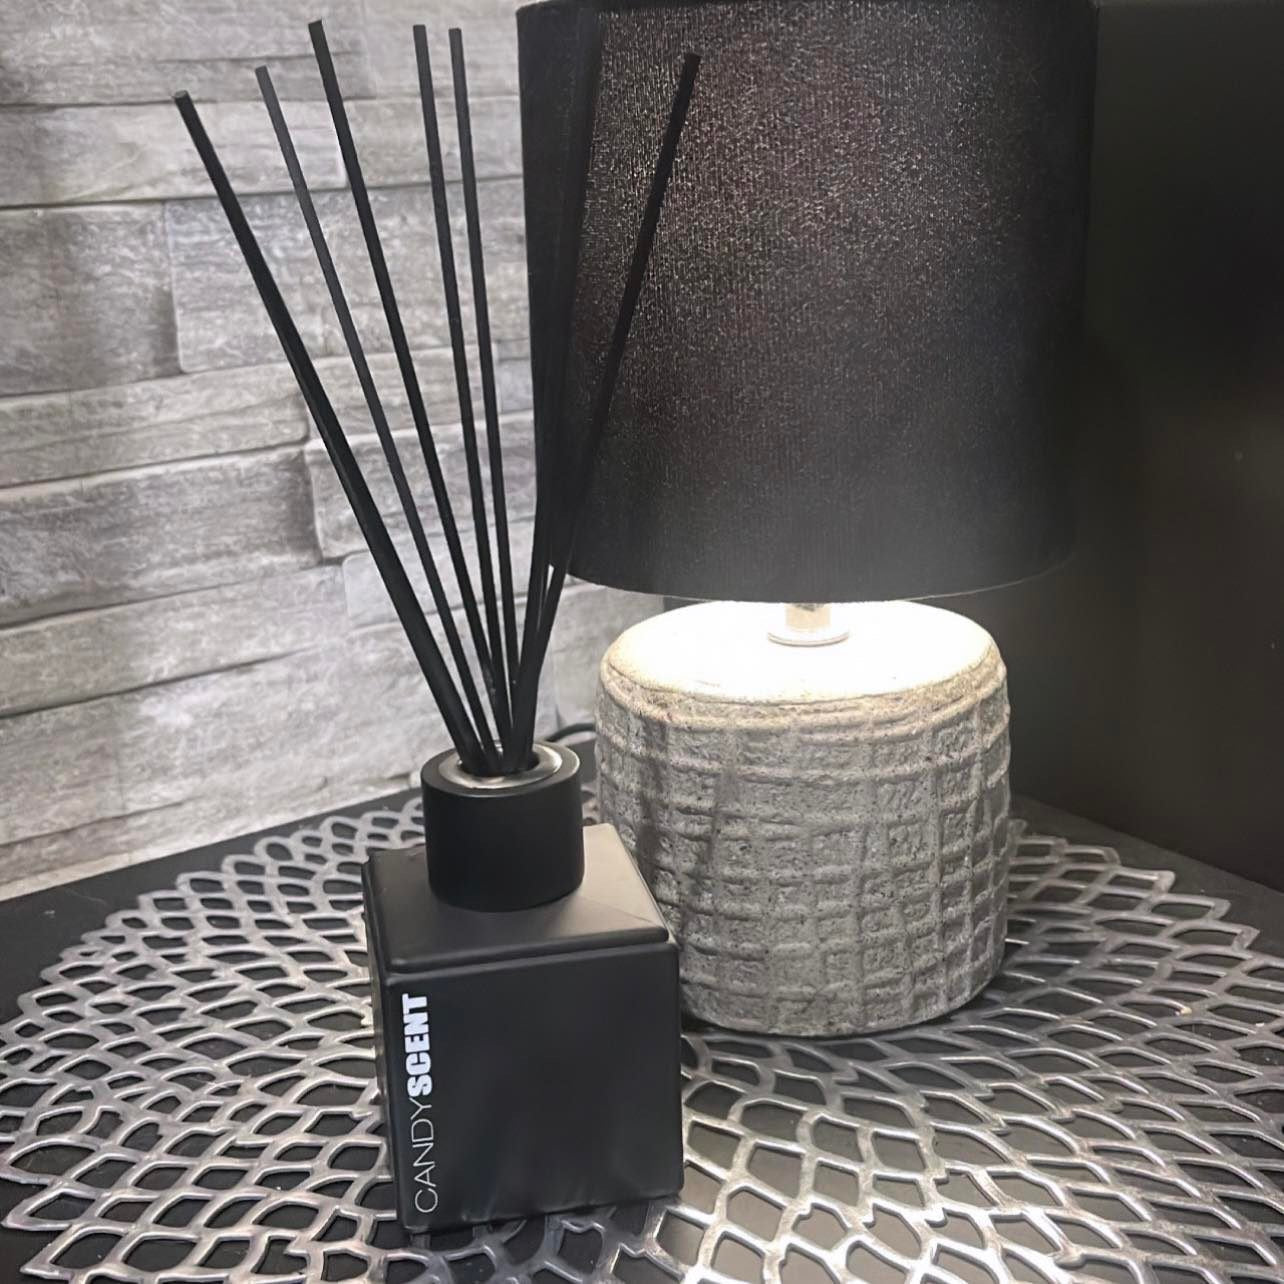 How to care for your Reed Diffuser